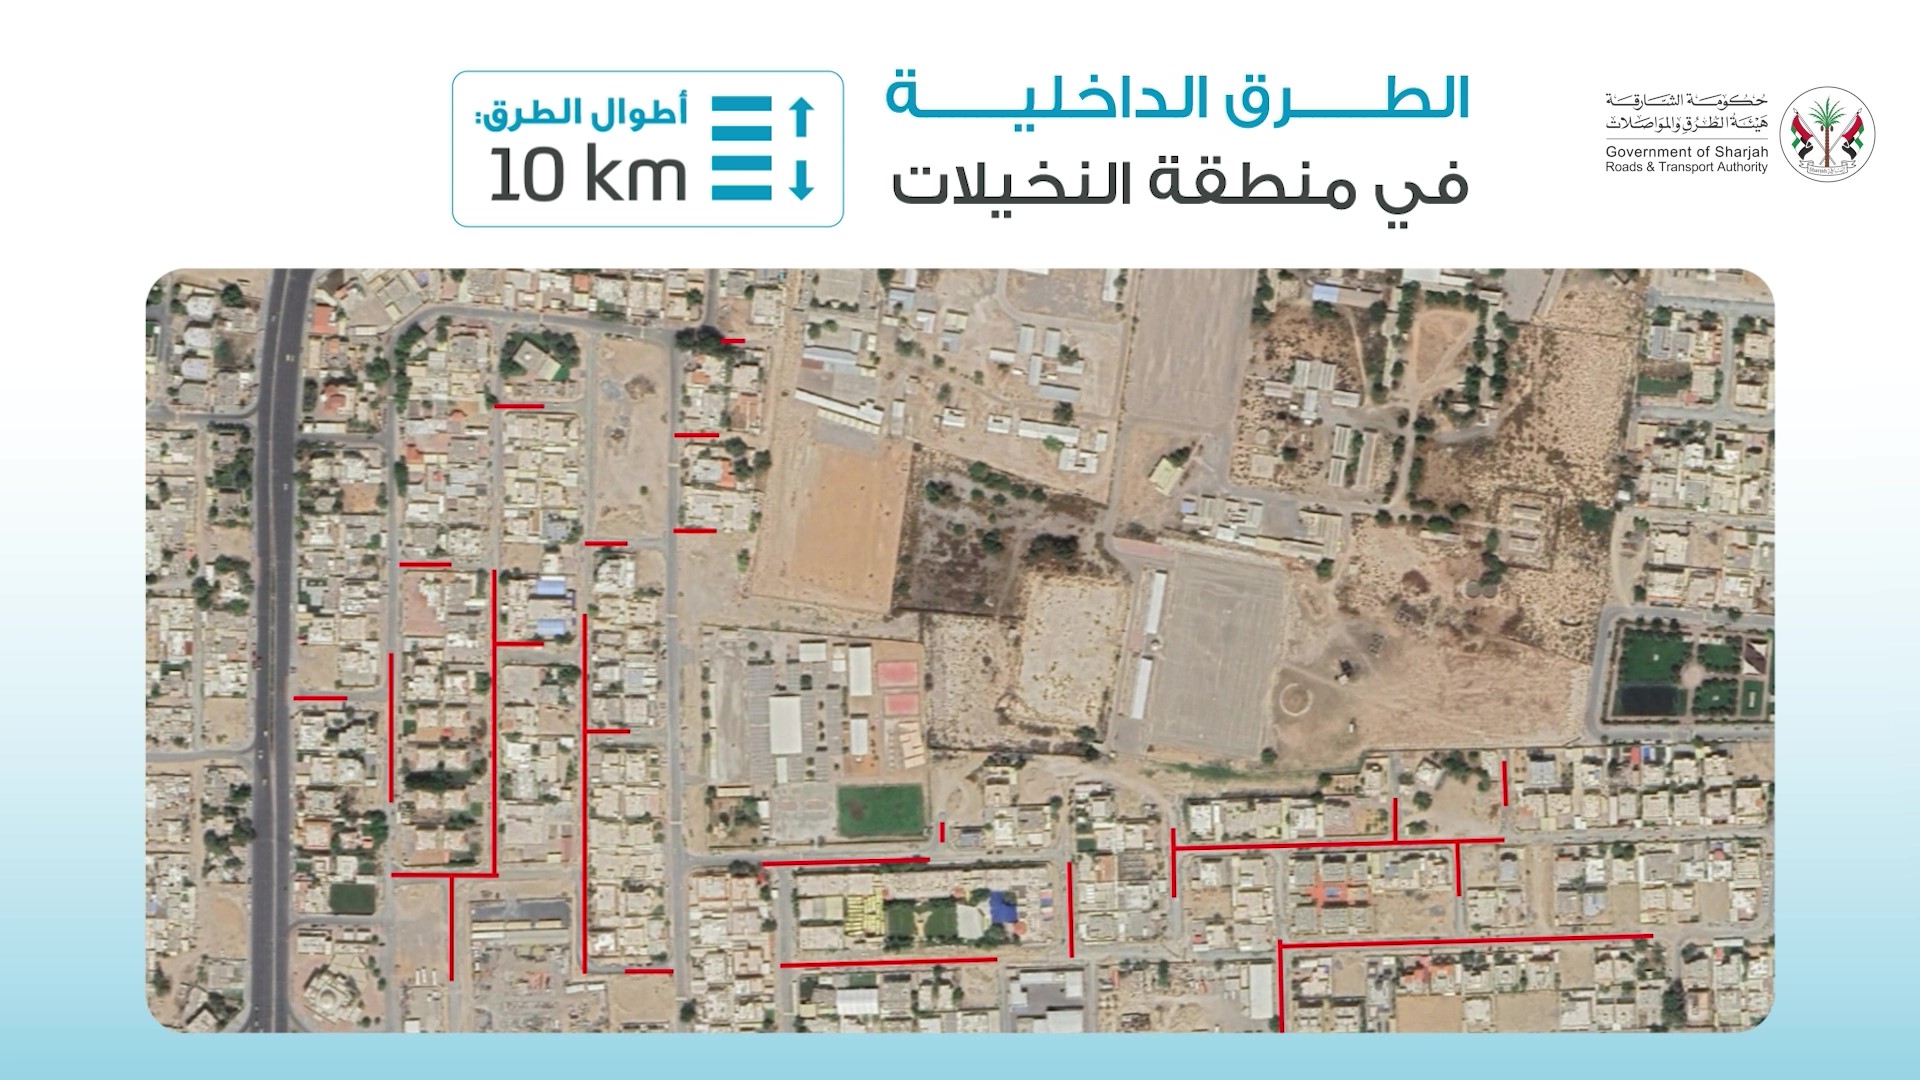 SRTA has completed paving the internal roads in the Al-Nakheelat area